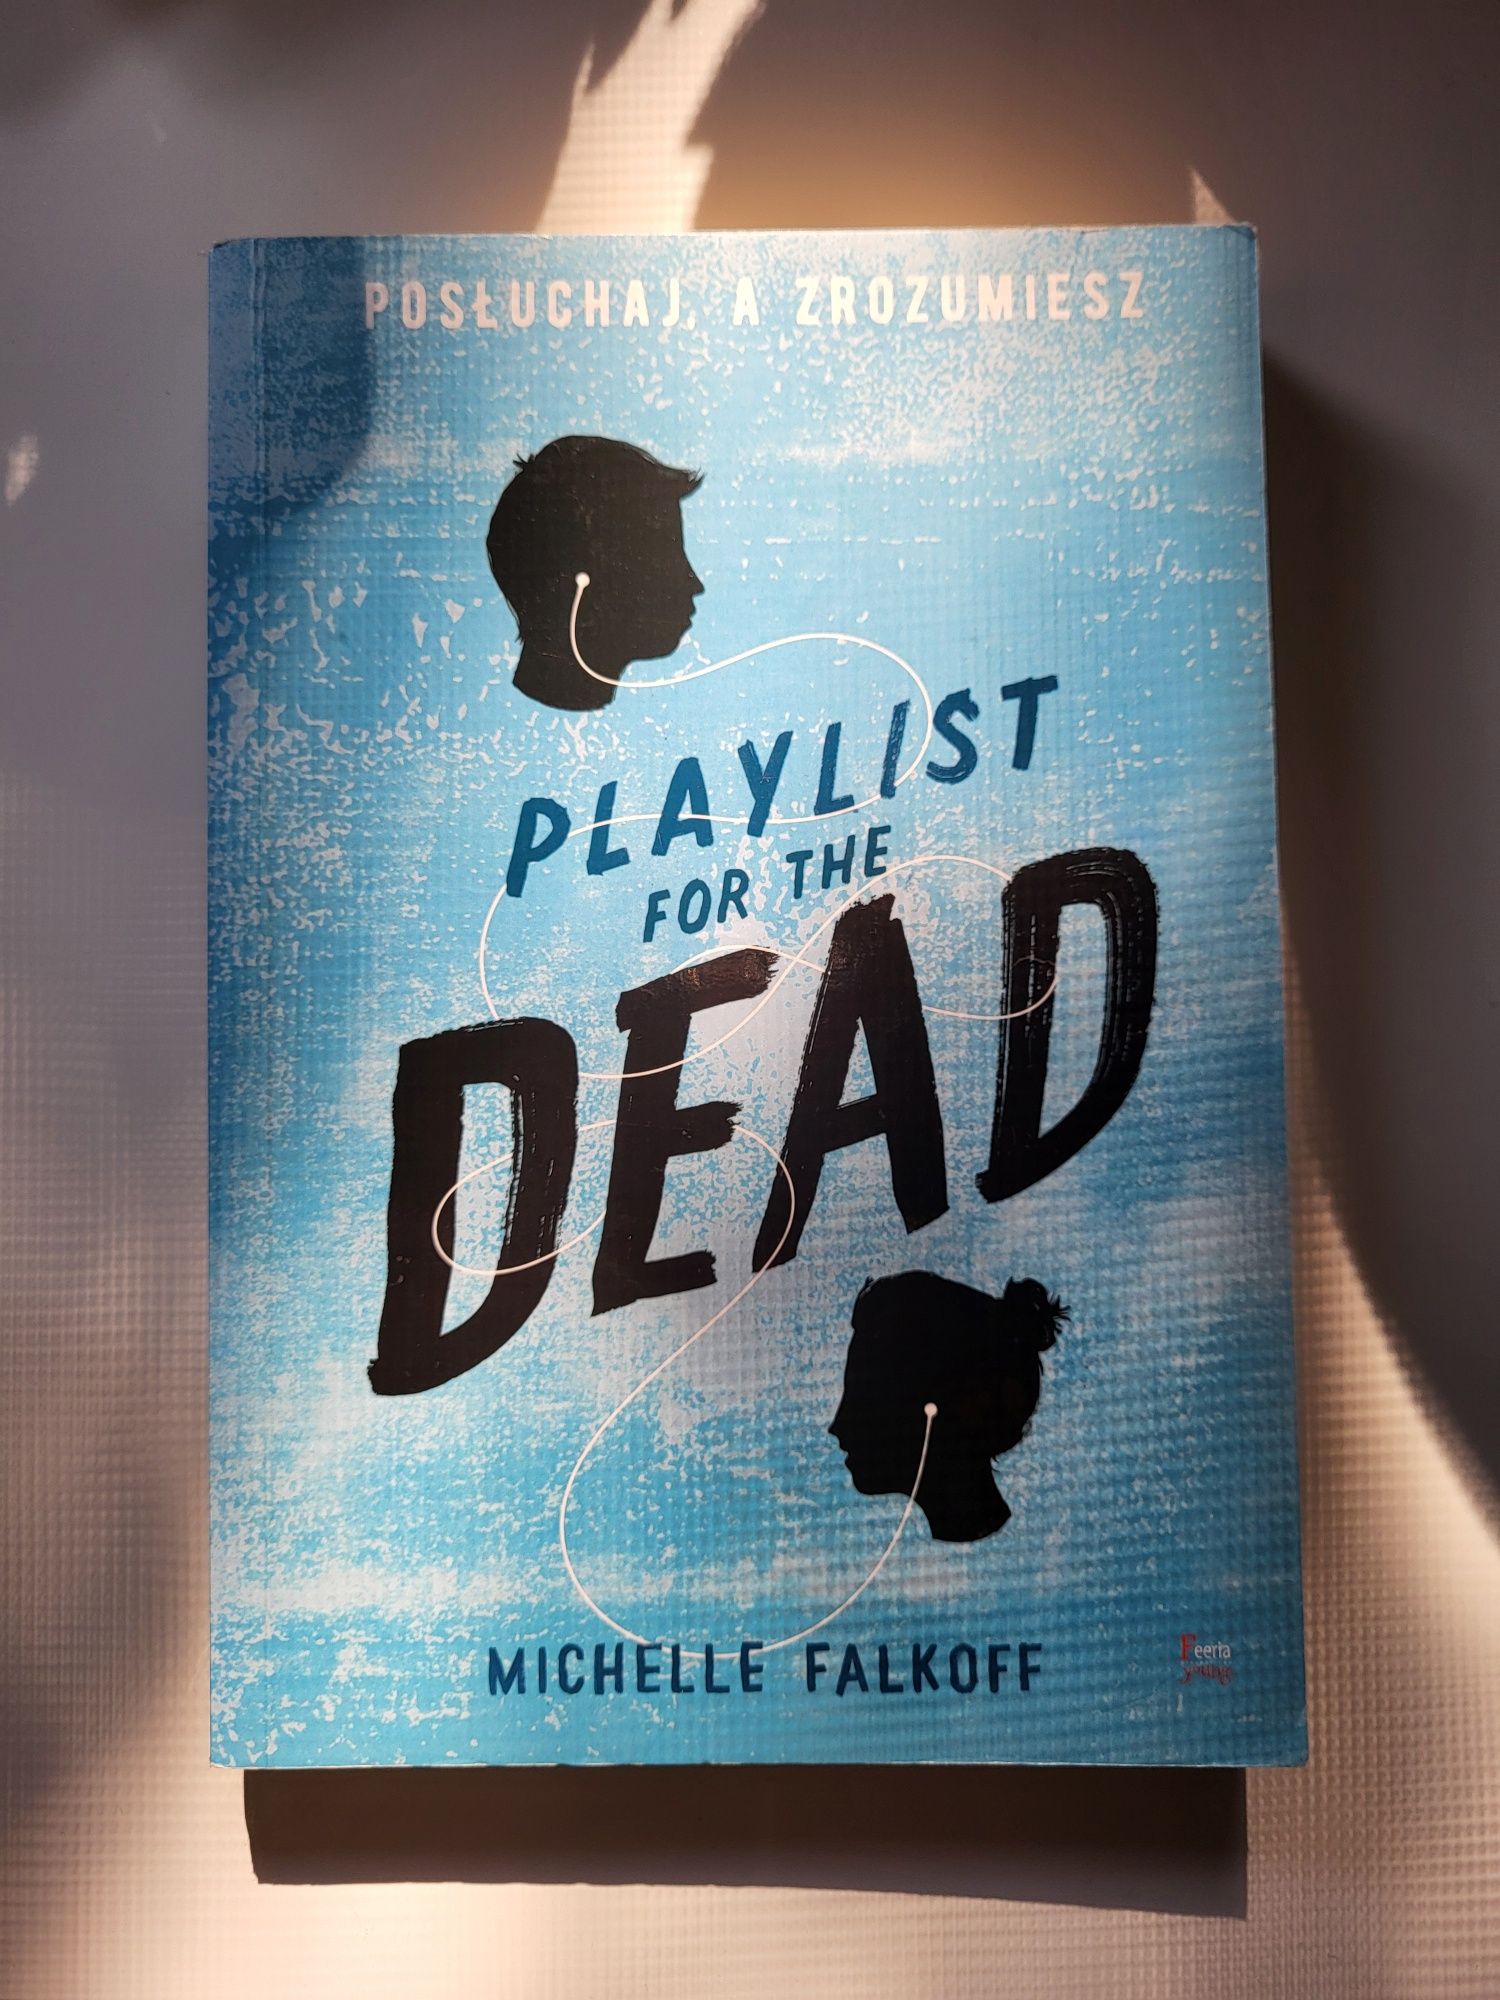 "Playlist for the dead" M. Falkoff